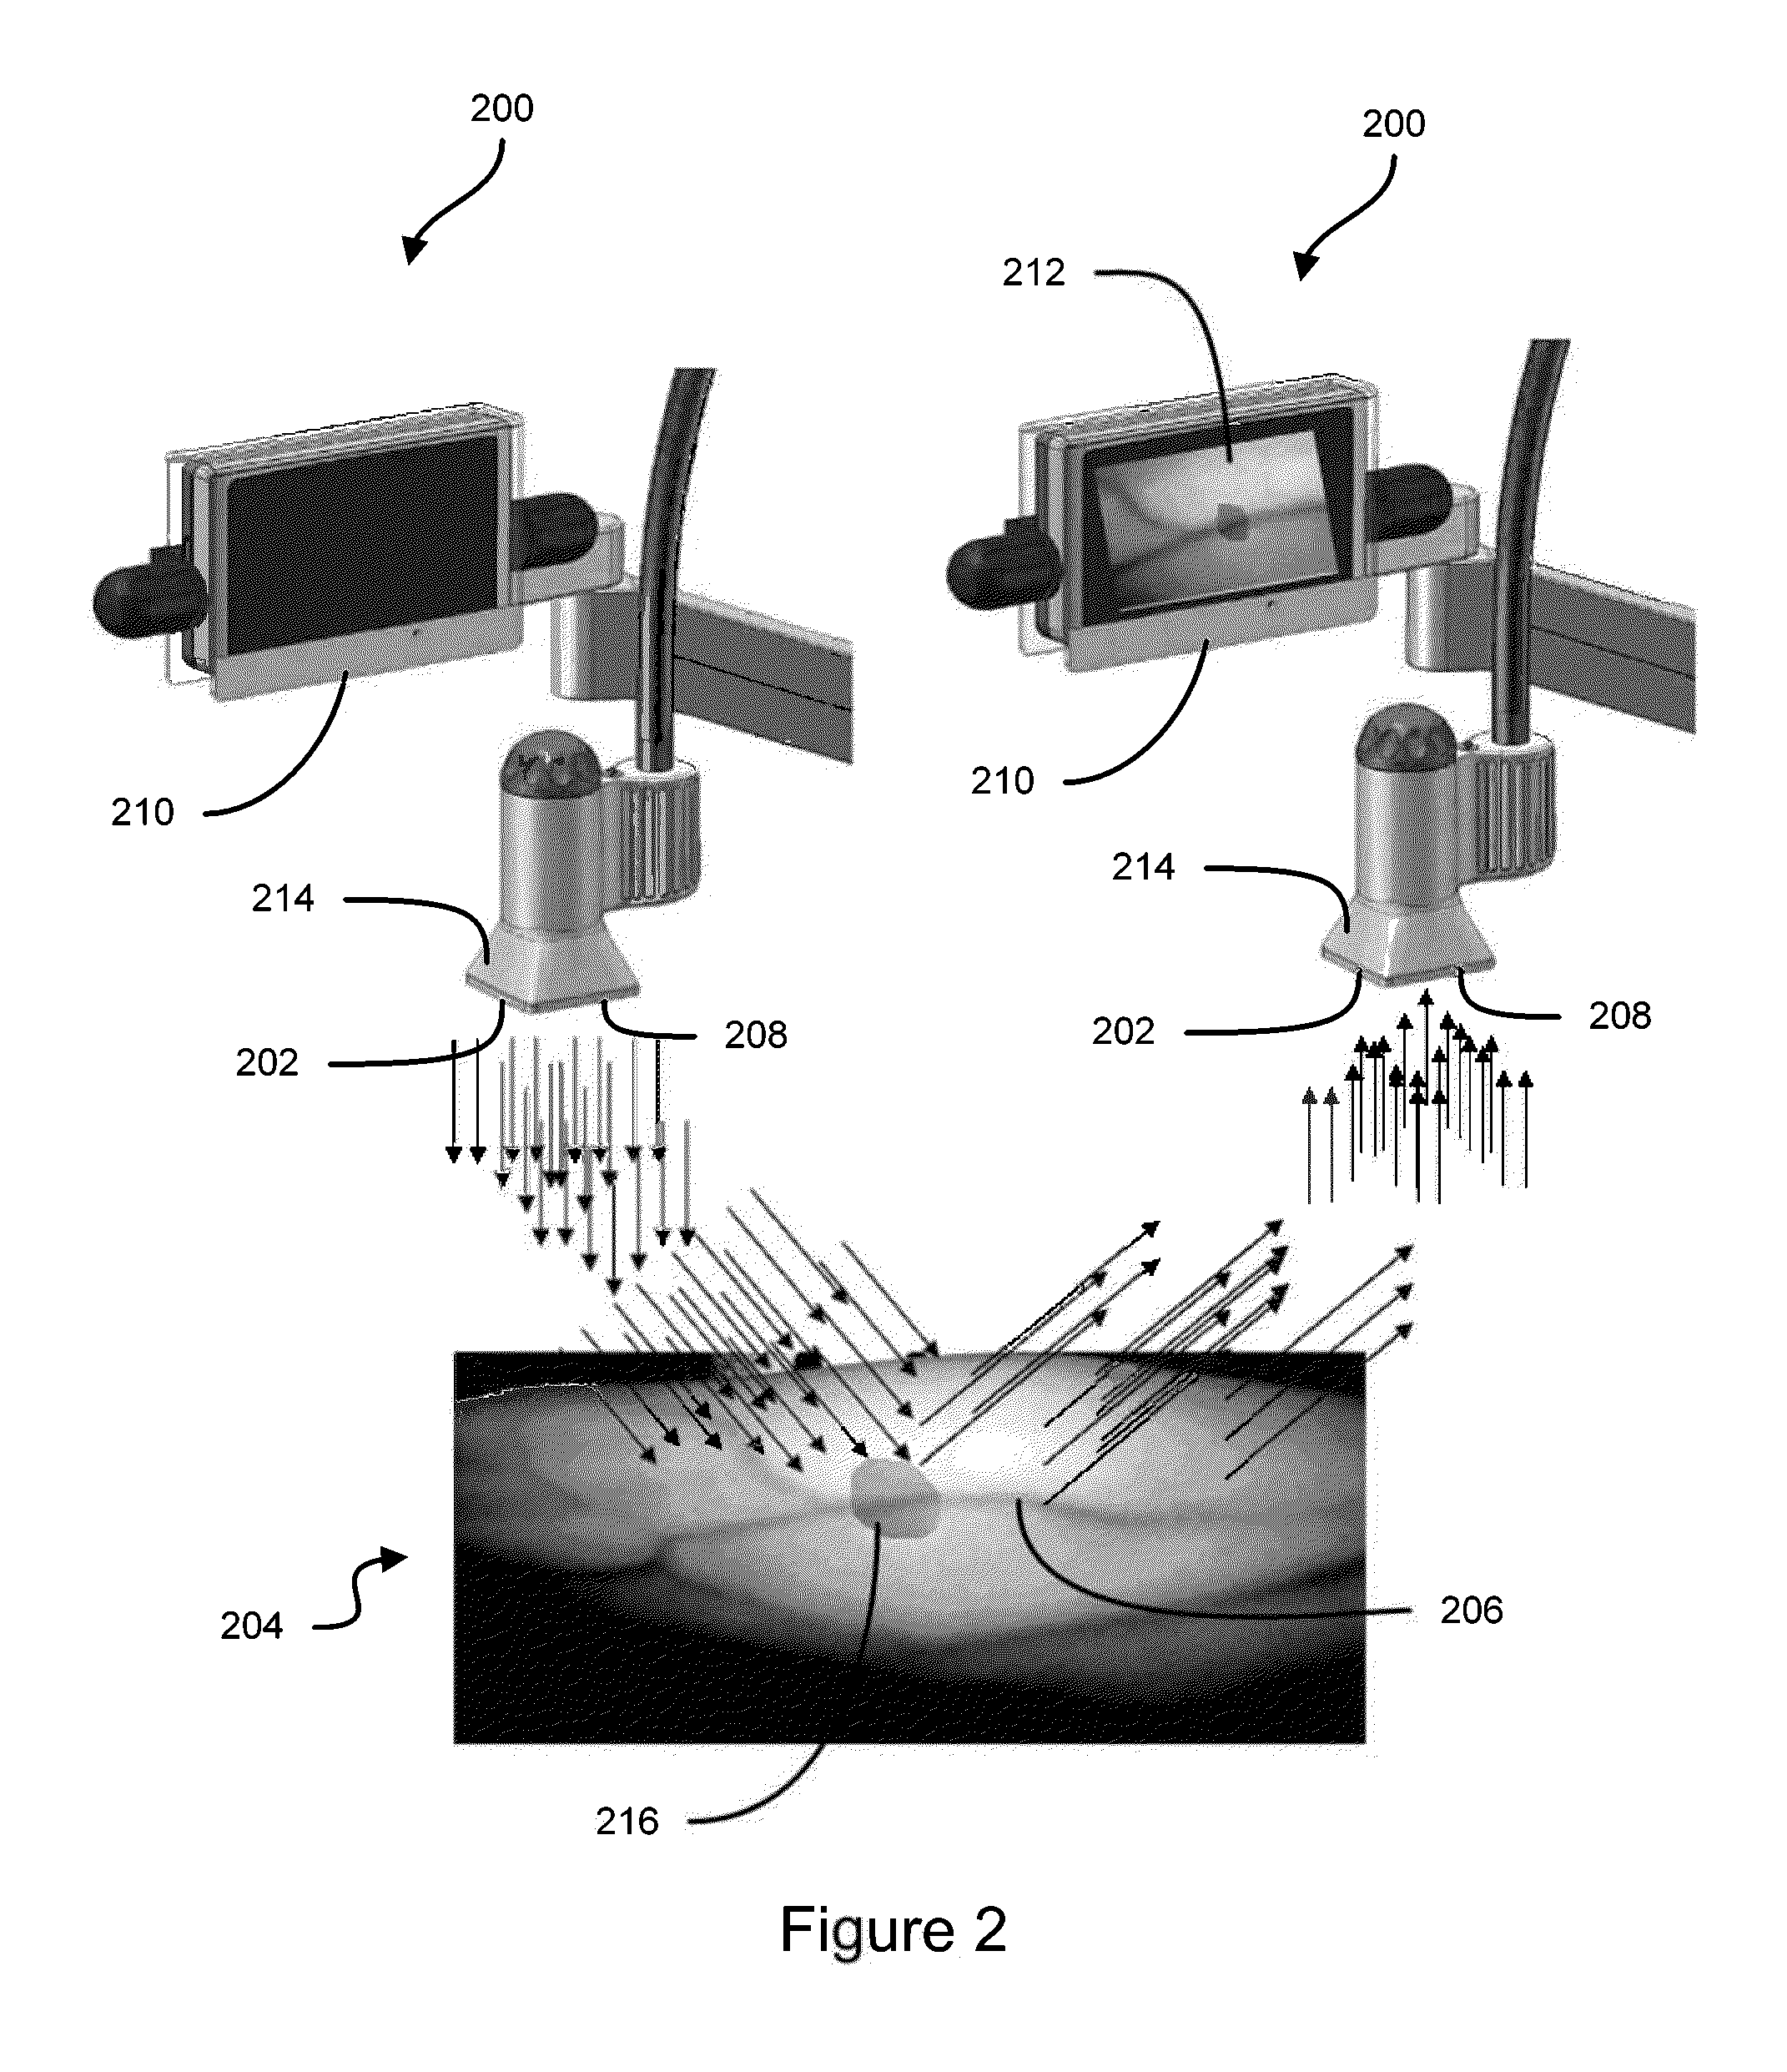 Vein imaging systems and methods